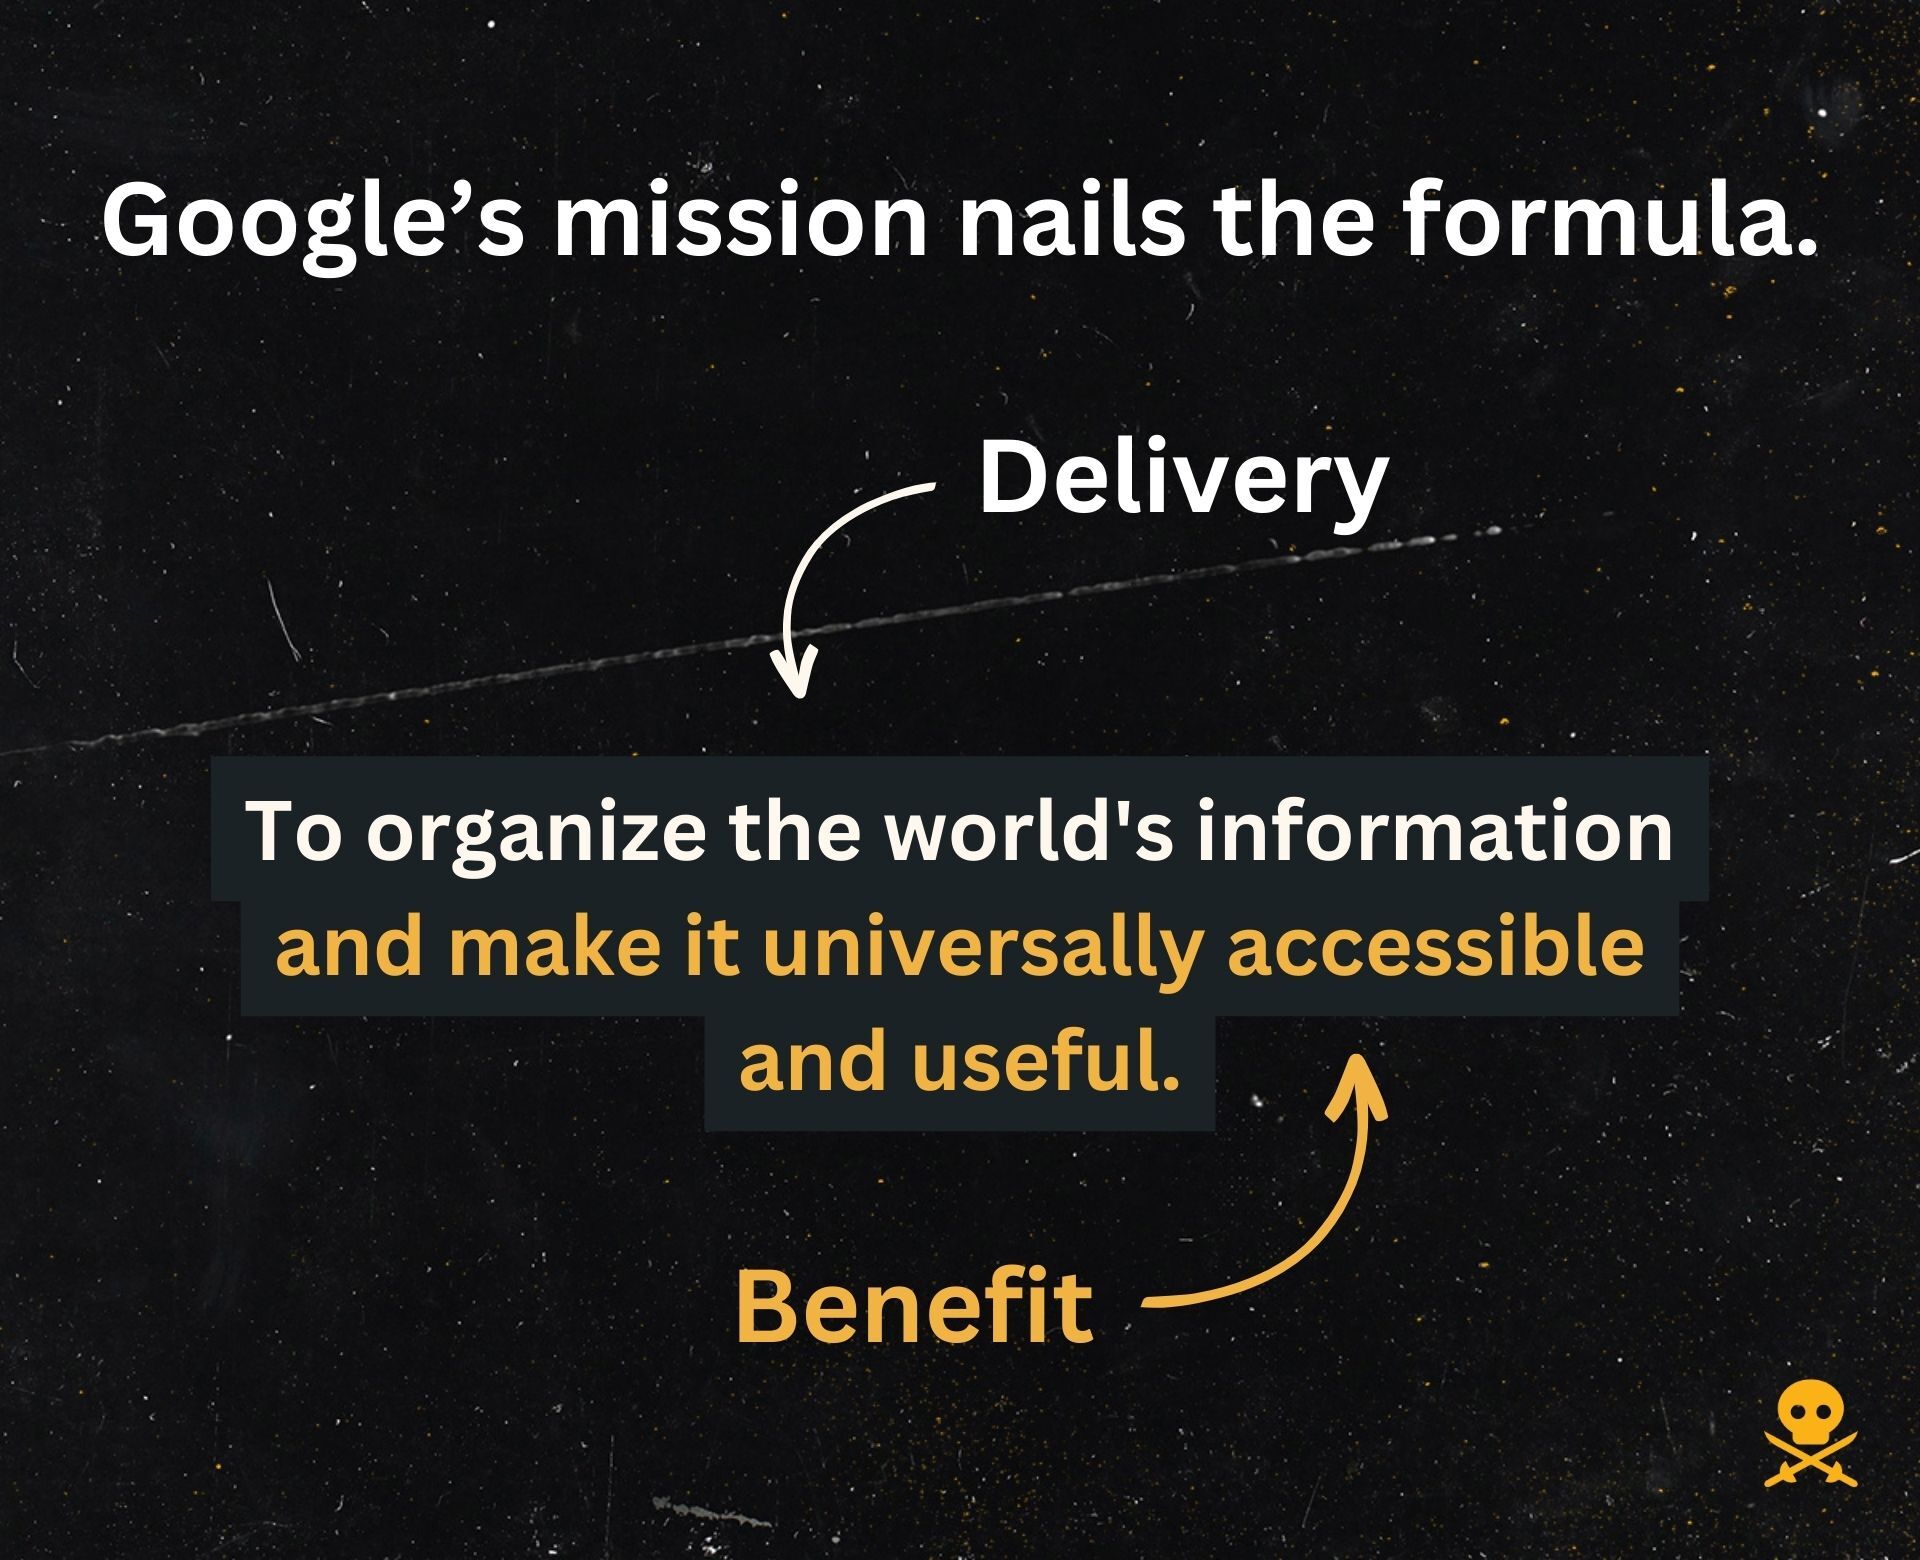 Graphic that illustrates Google's mission statement fitting the mission= delivery + benefit formula. "To organize the world's information (delivery) and make it universally accessible and useful. (benefit)